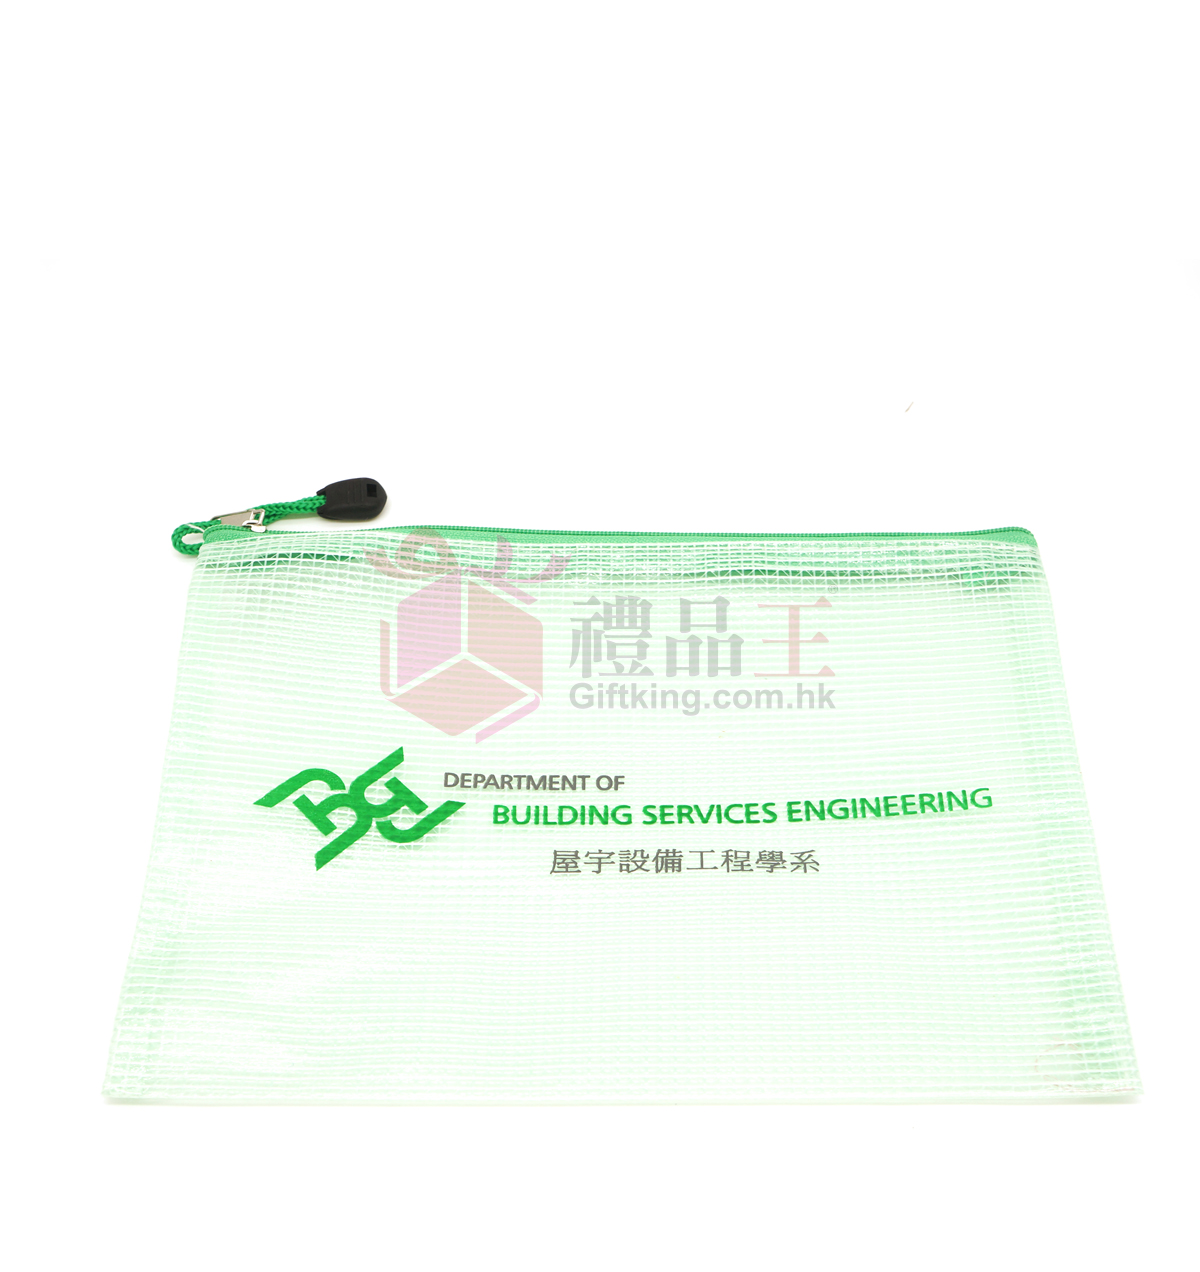 Department of Building Equipment Engineering, University of Science and Technology Mesh Bag ( Stationery Gift)